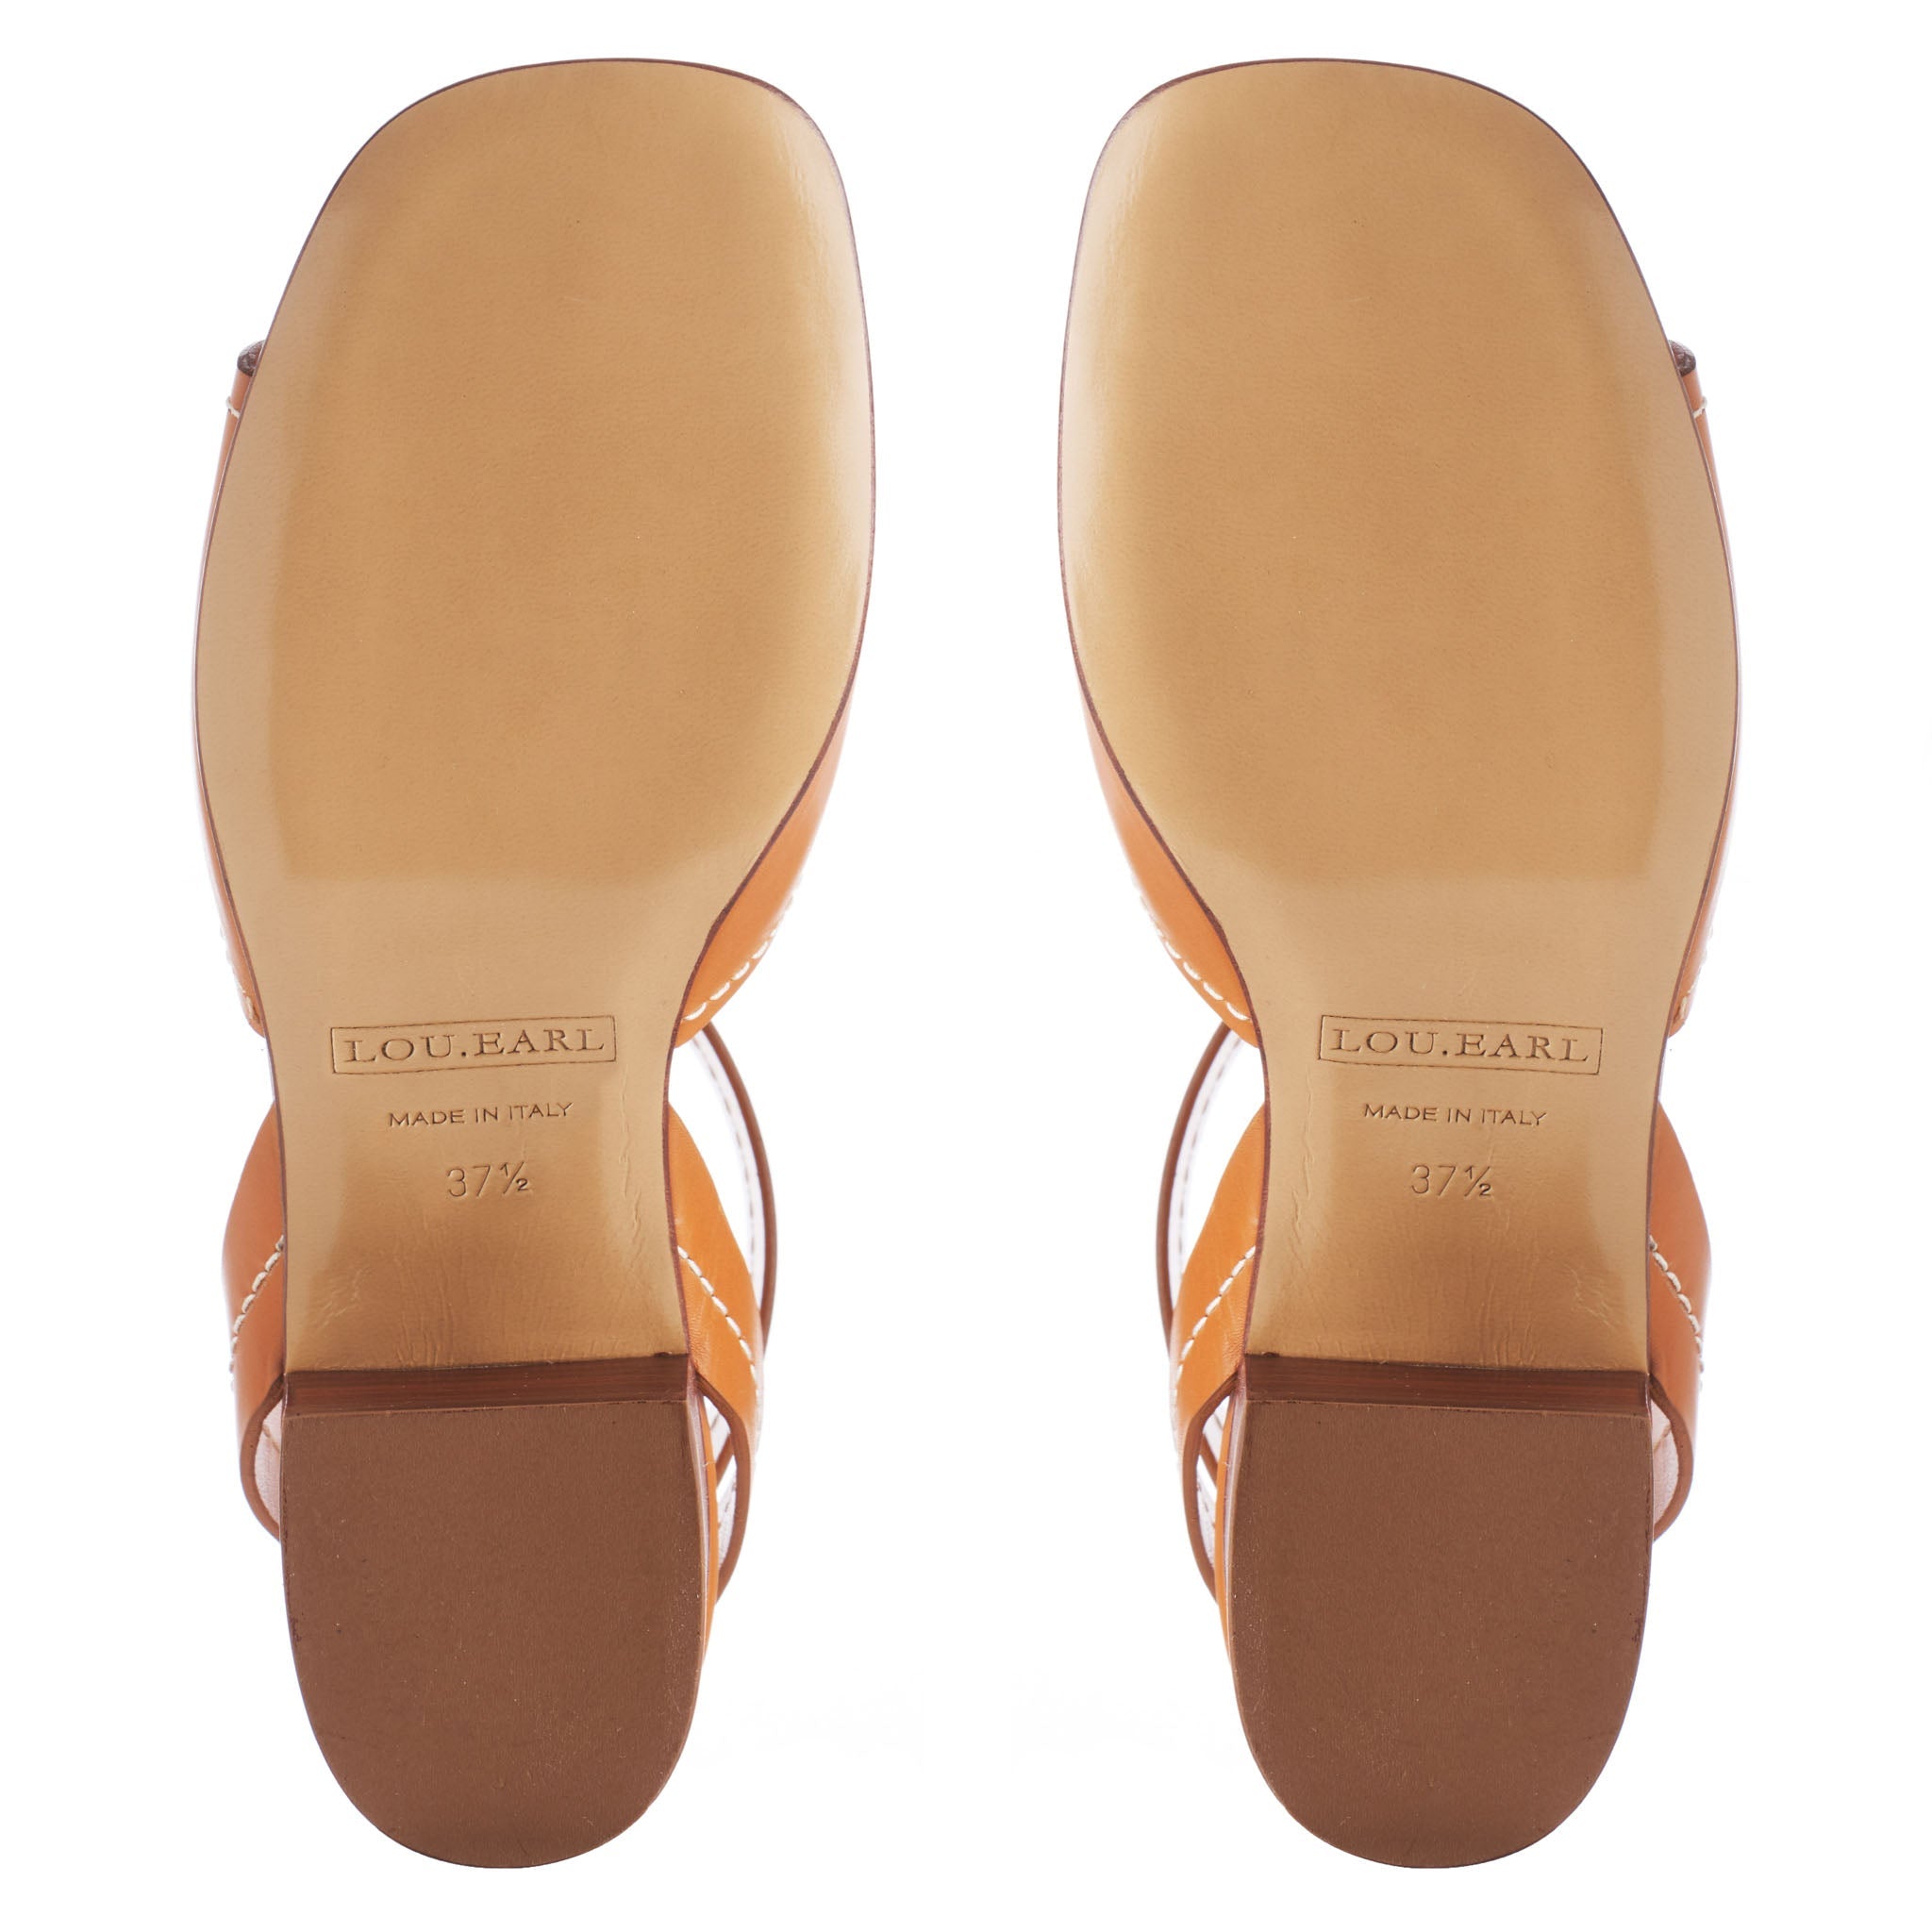 sandals with leather outsole for women with a slightly rounded square toe.